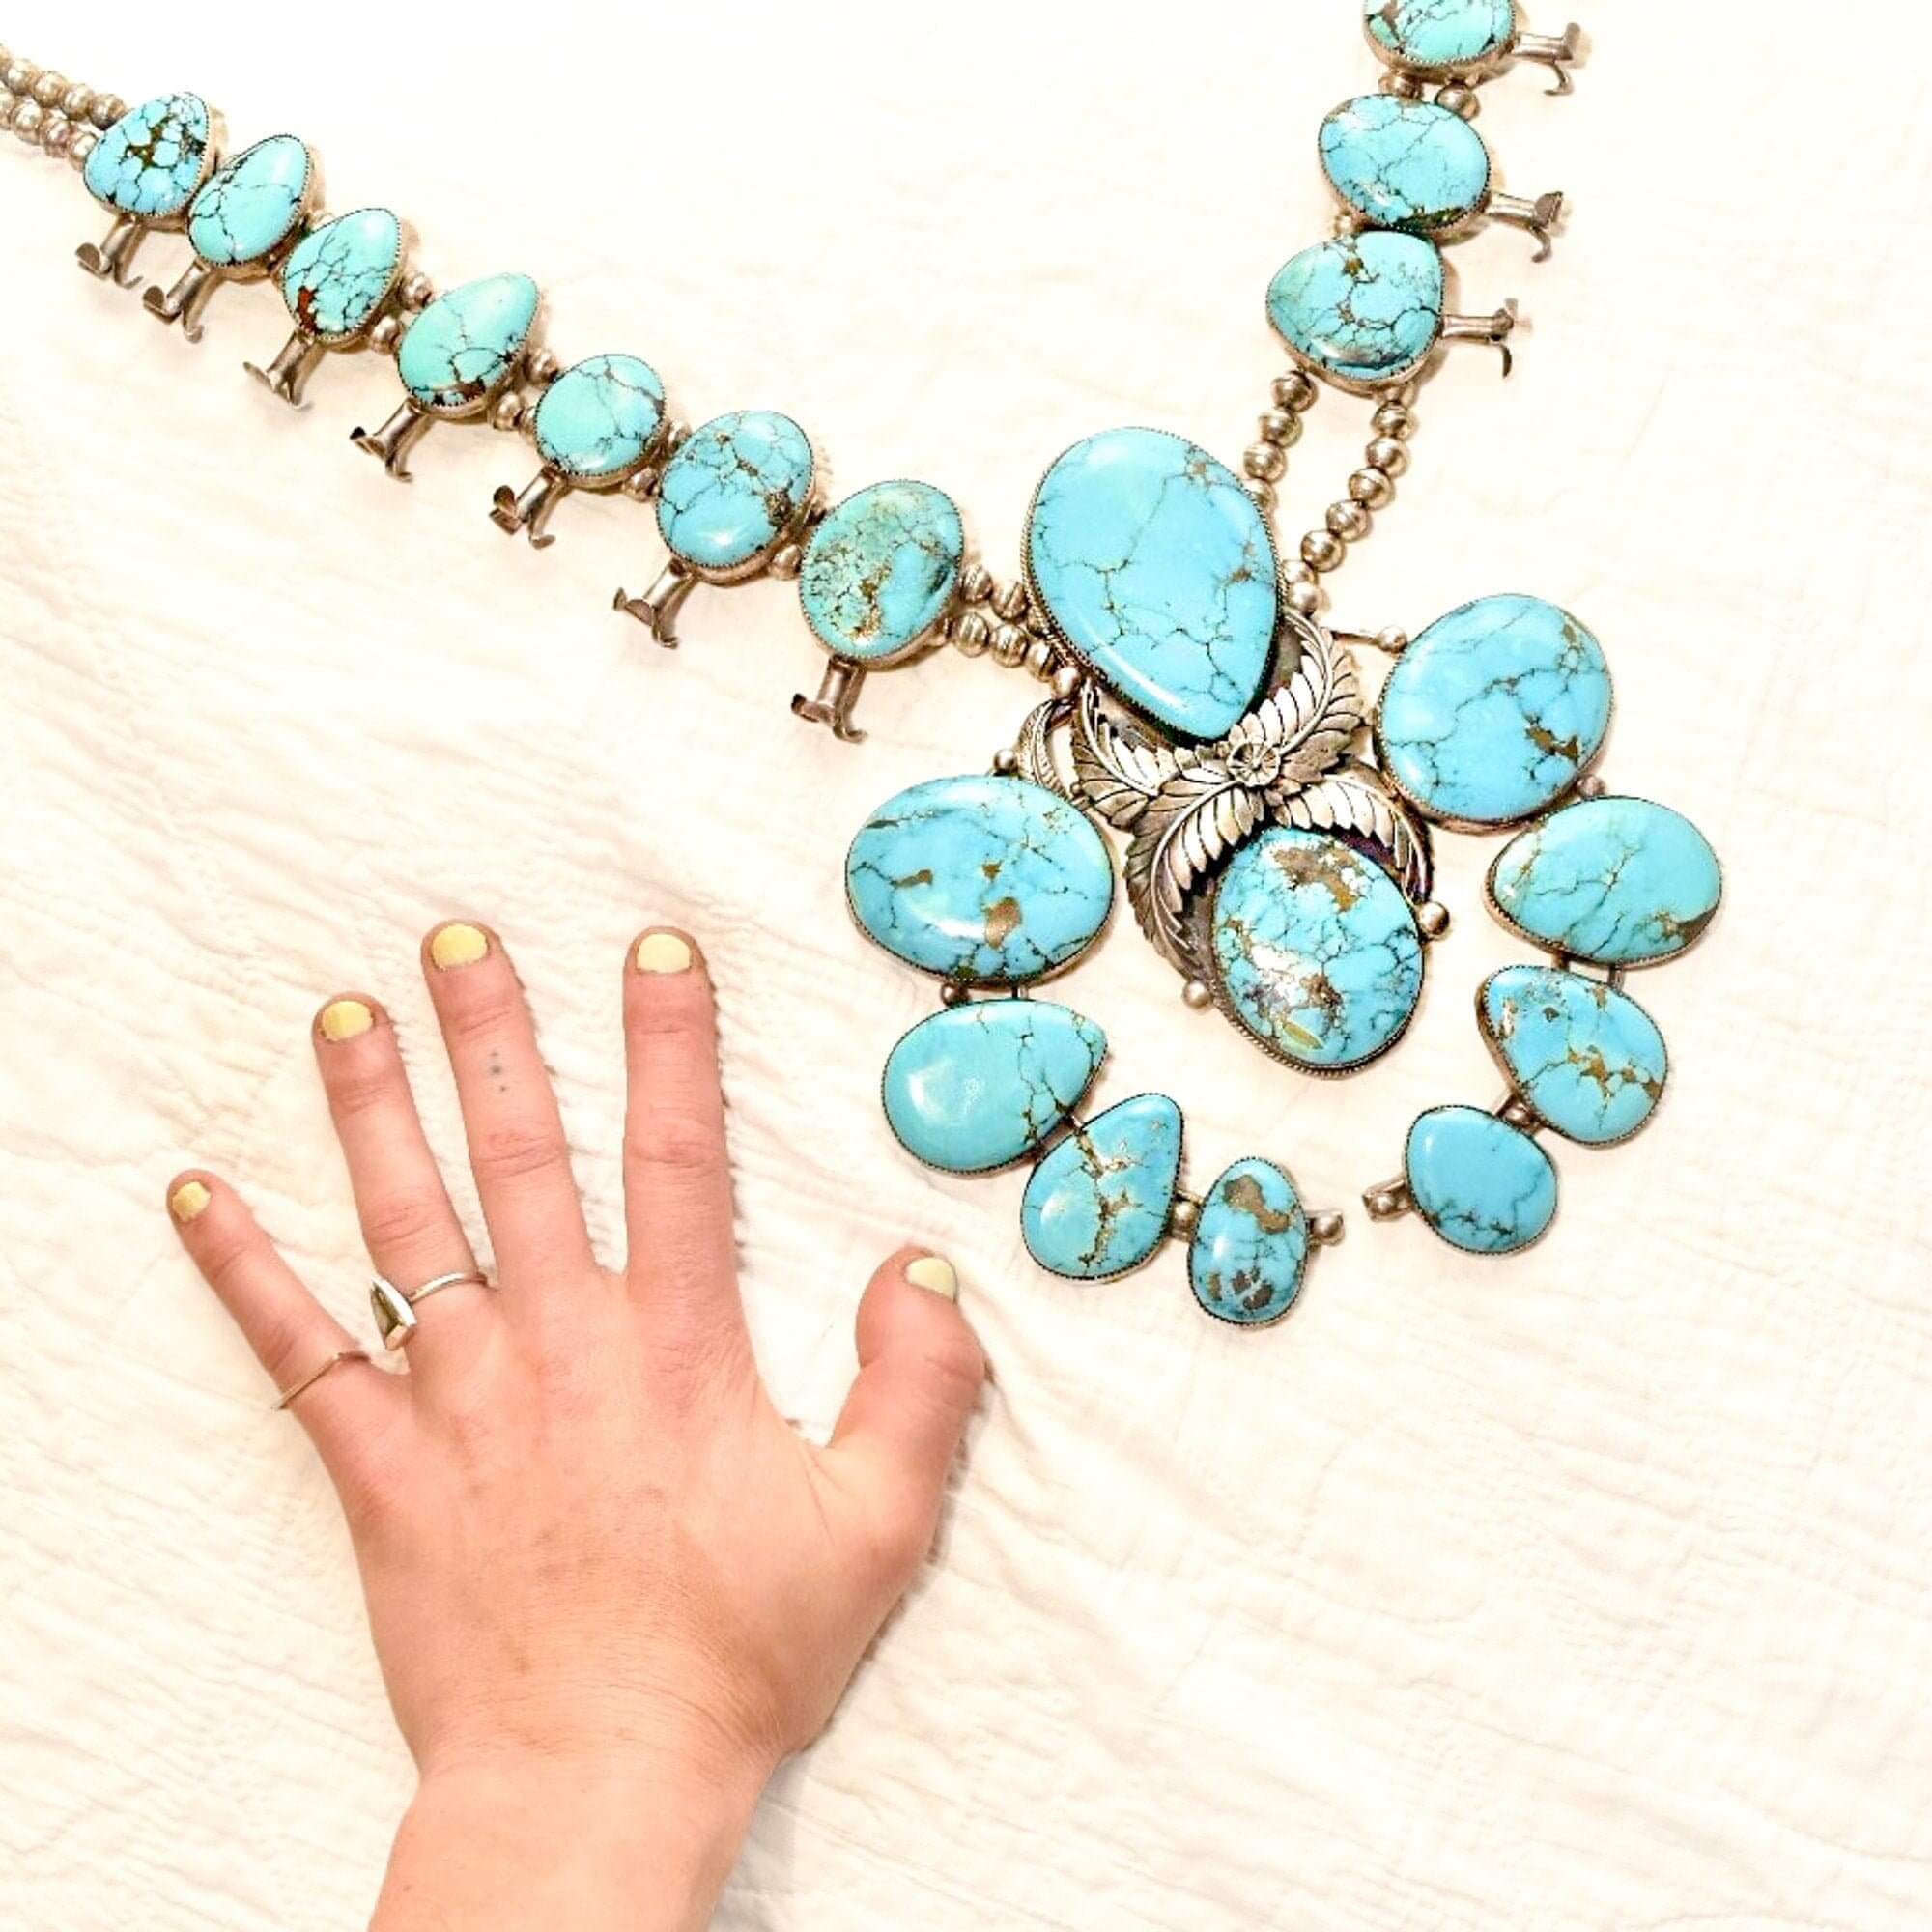 Vintage Number 8 Turquoise Squash Blossom Necklace - Four Winds Gallery